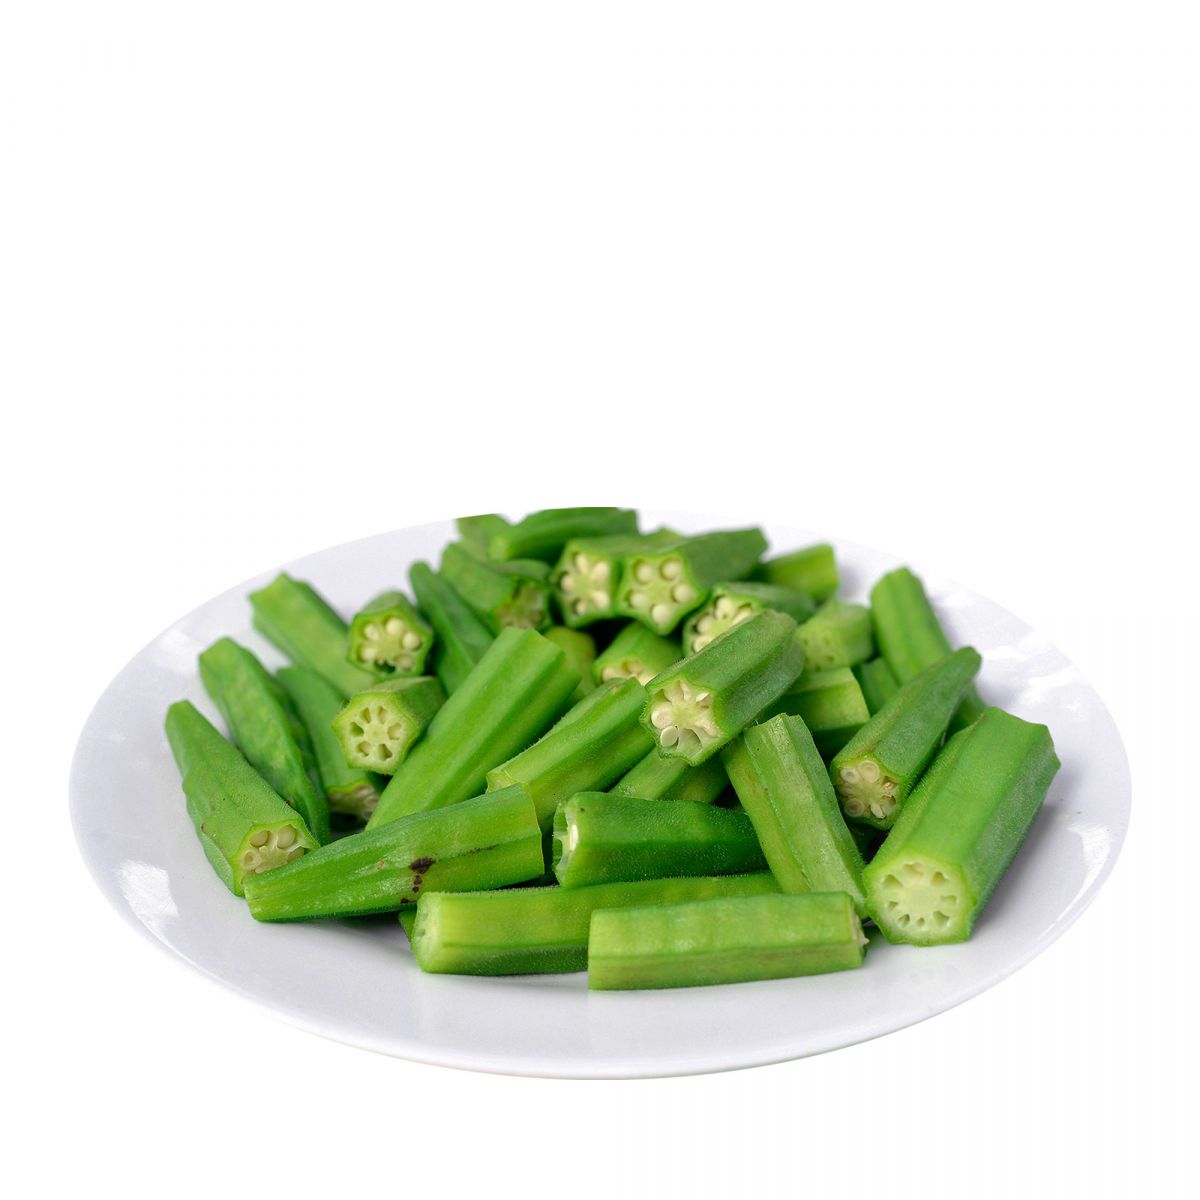 http://lavifood.com/en/products/blanching/okra